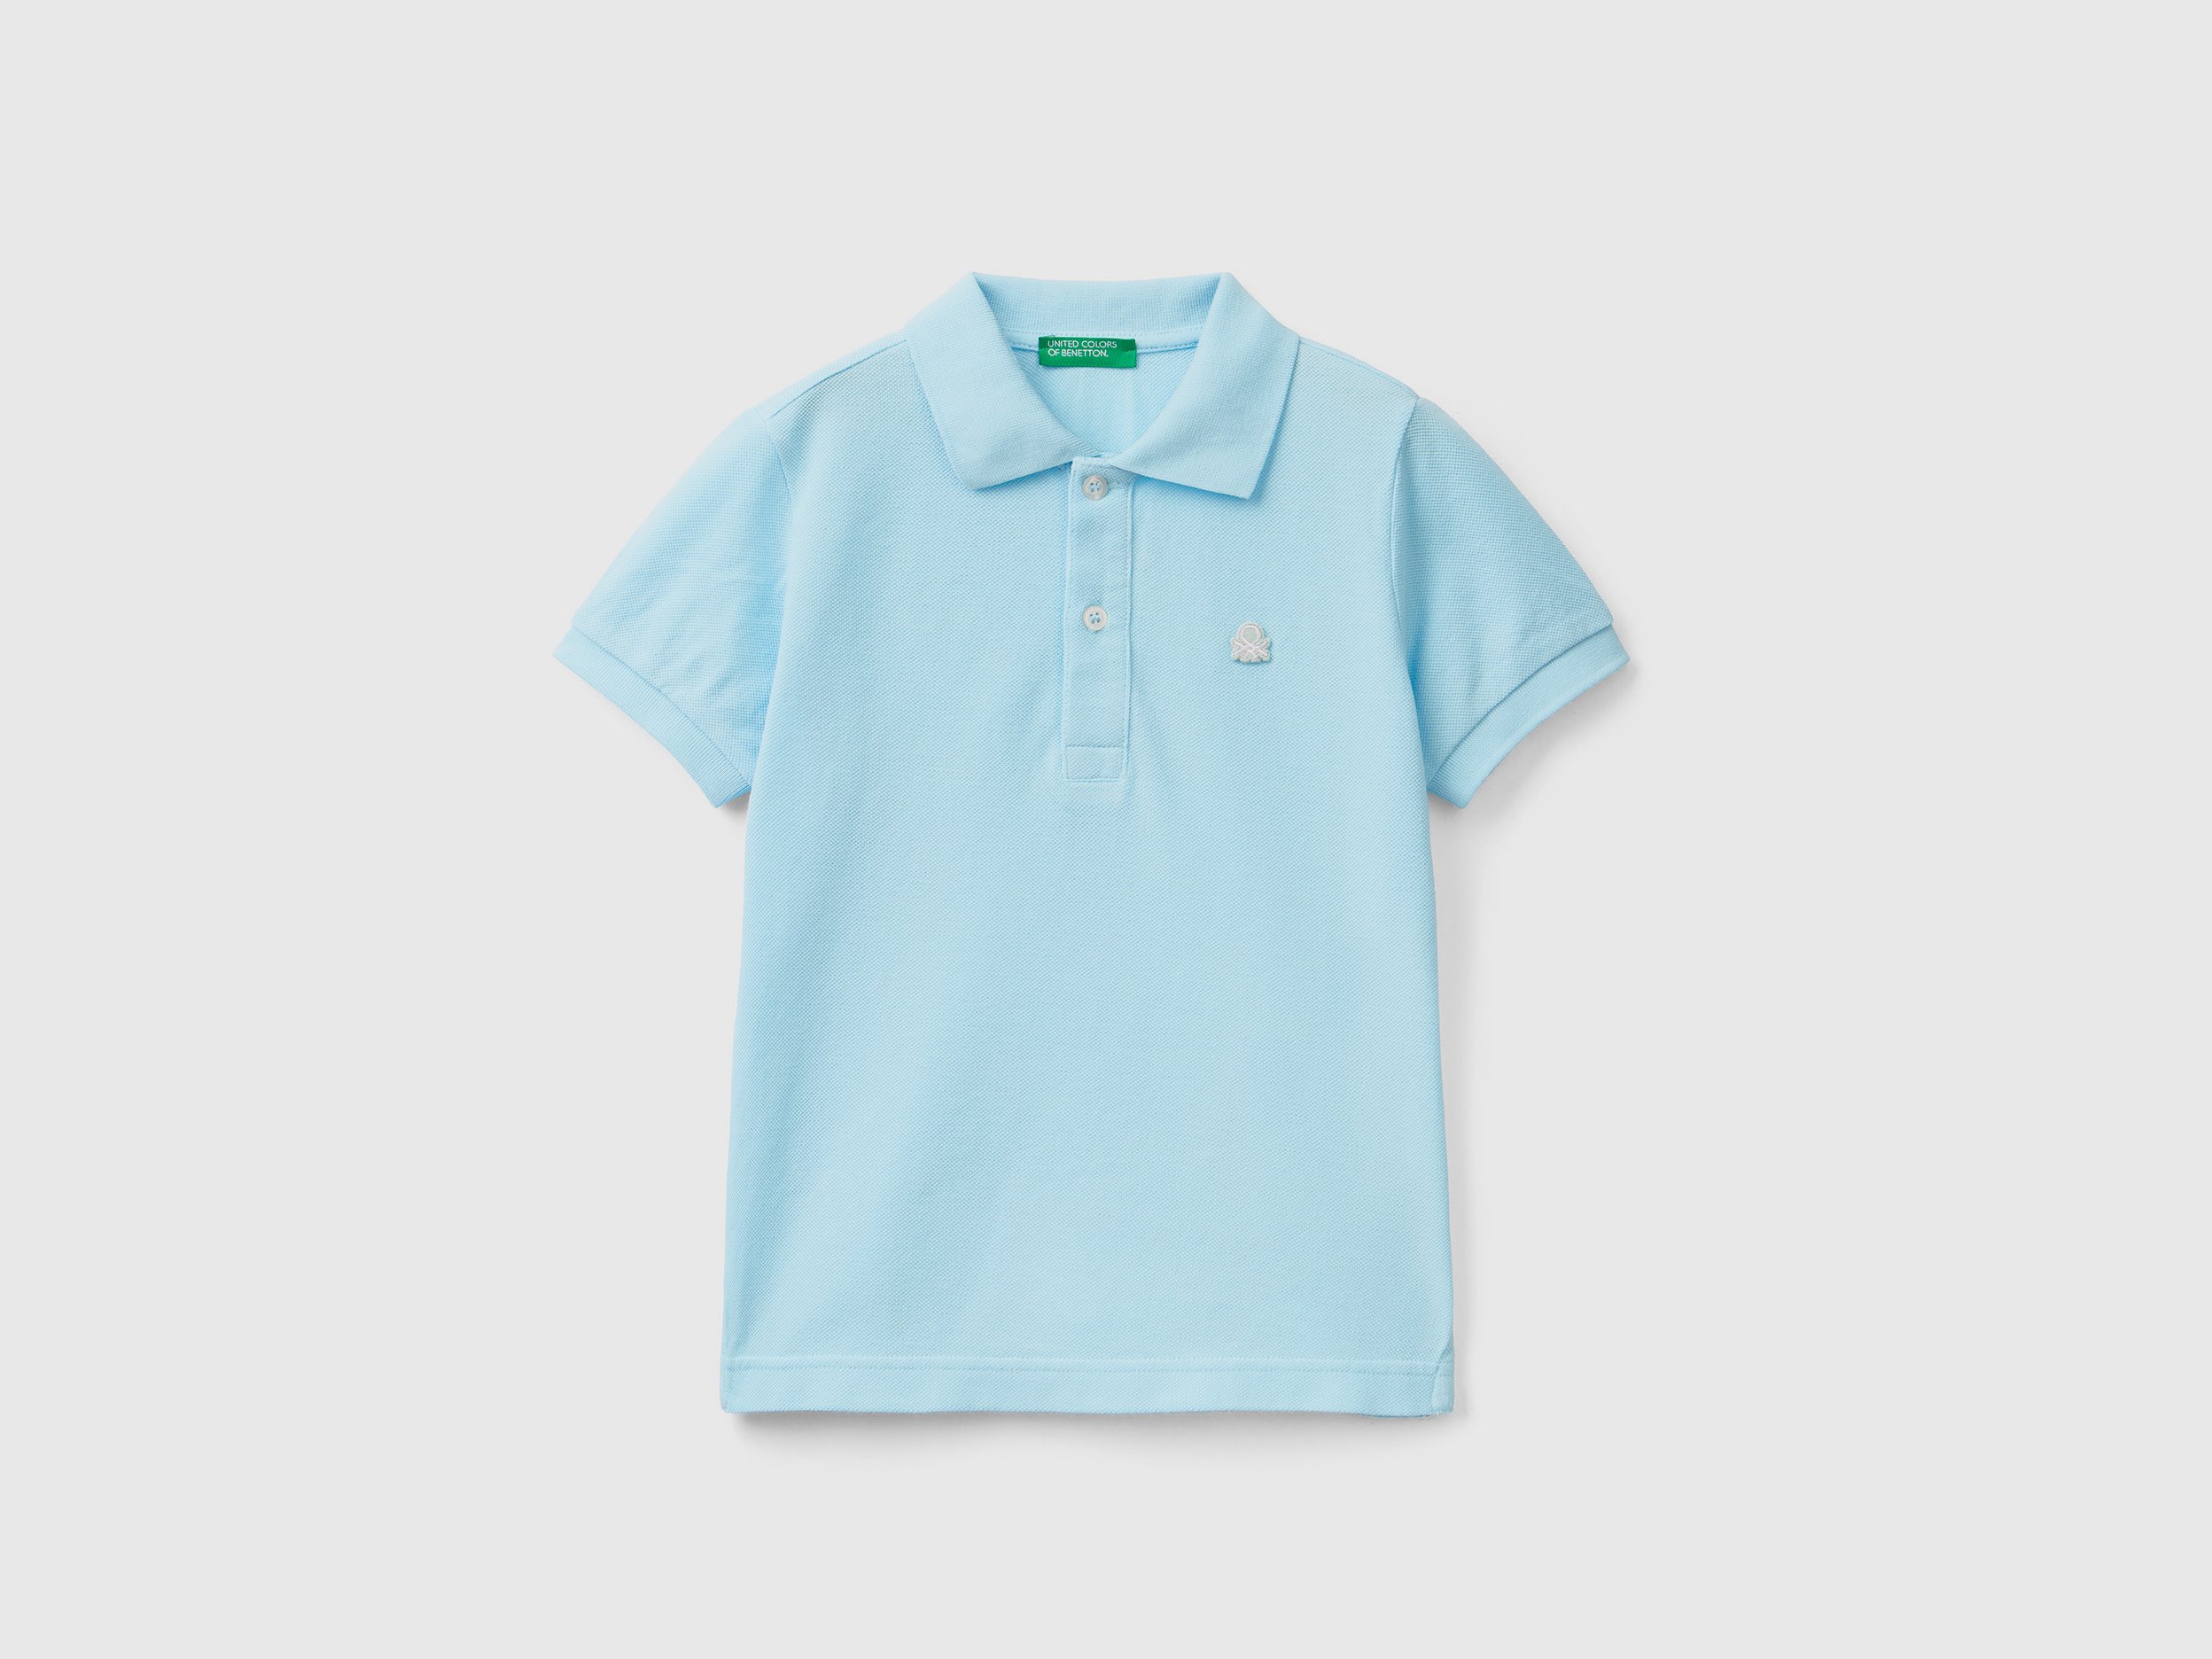 Image of Benetton, Neon Polo In Organic Cotton, size 104, , Kids